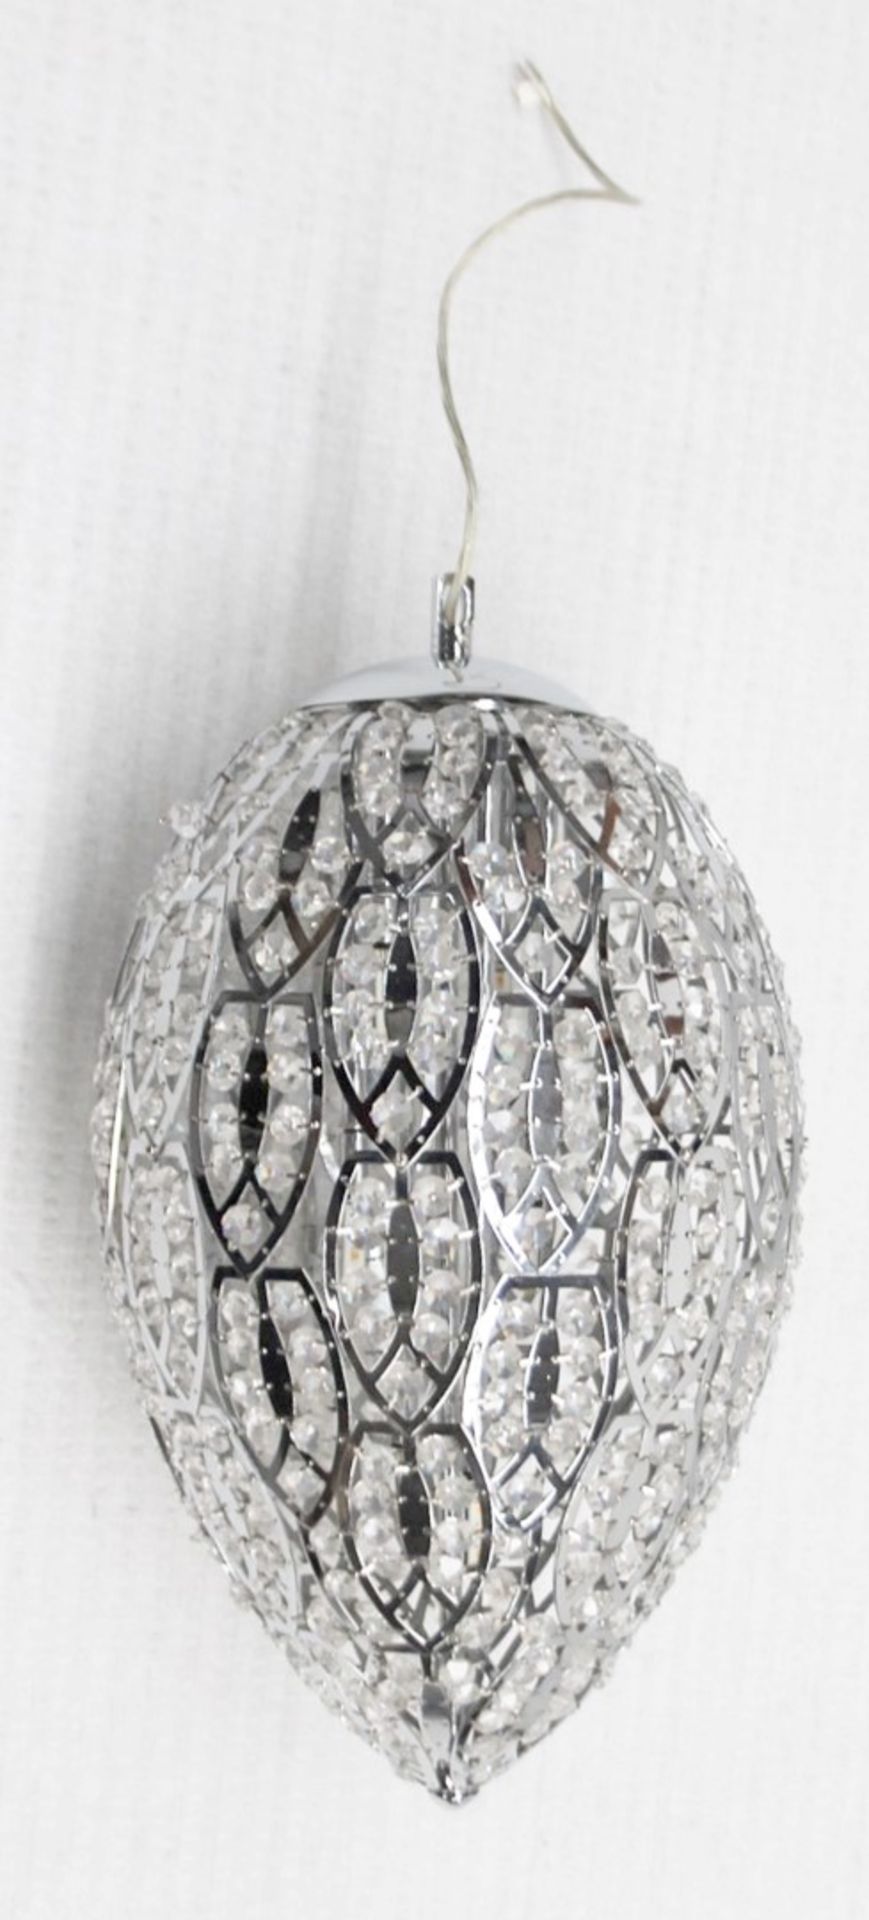 1 x High-end Italian LED Egg-Shaped Light Fitting Encrusted In Premium ASFOUR Crystals - RRP £4,000 - Image 3 of 9